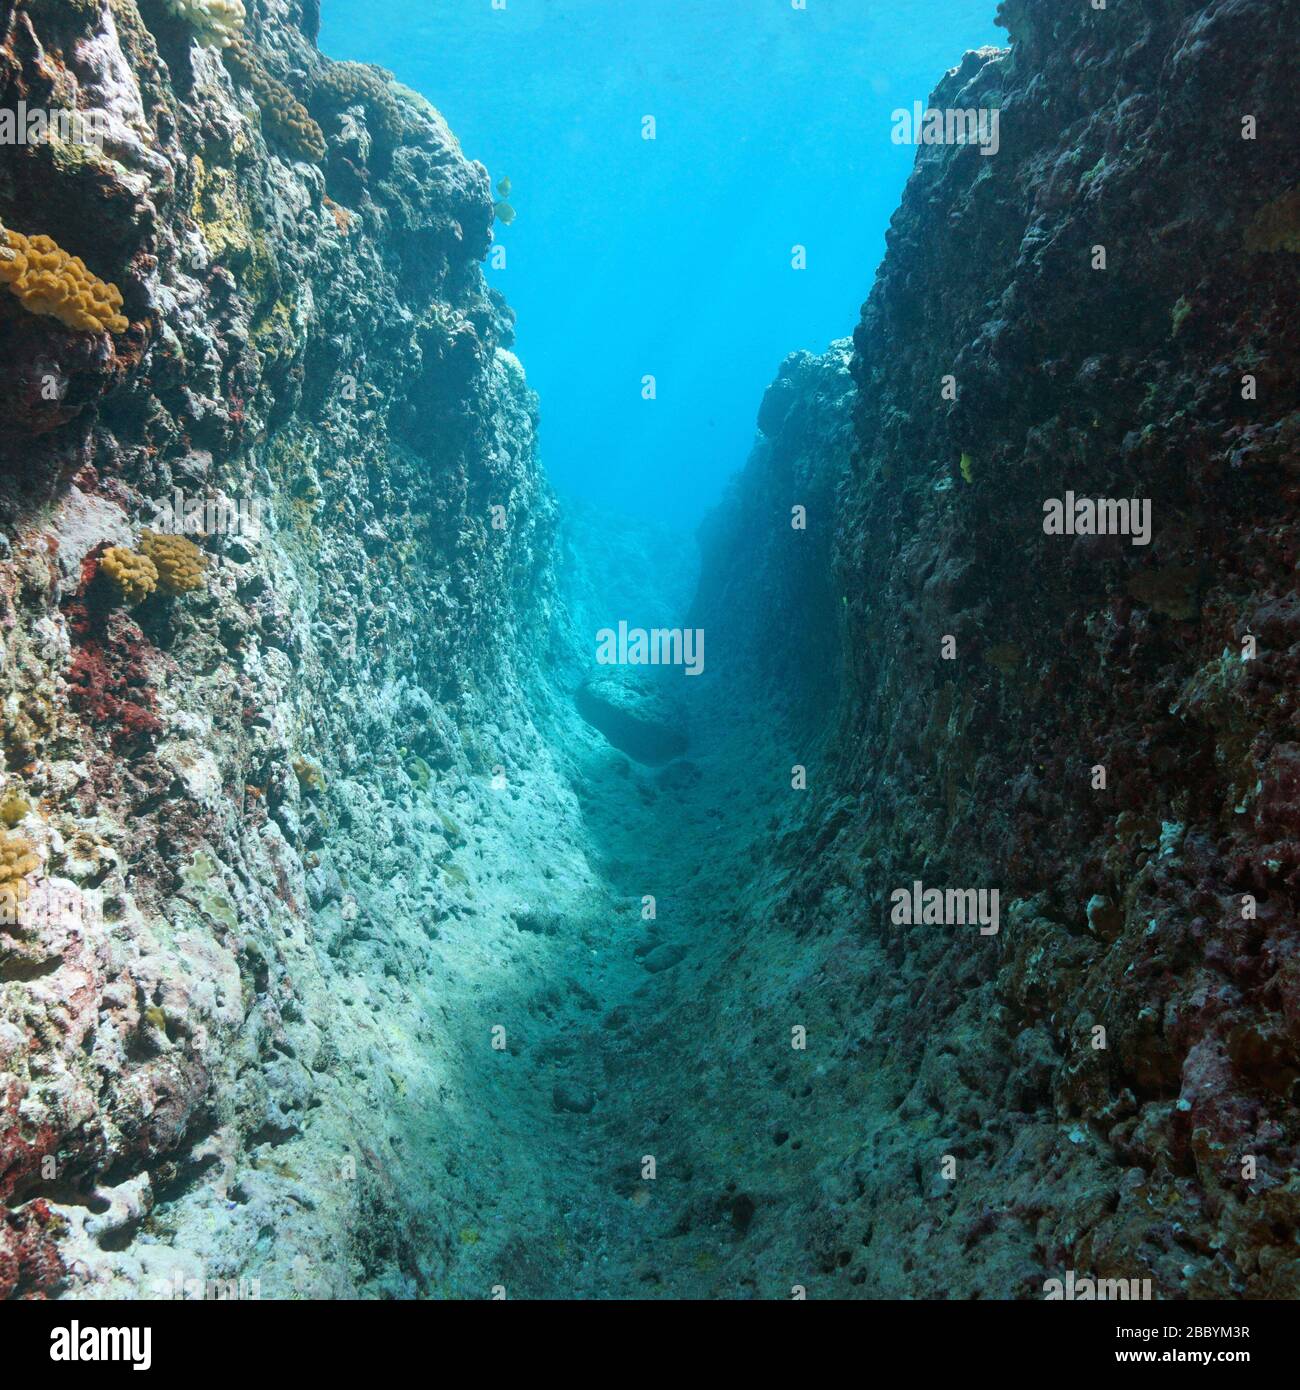 Underwater a narrow passage in a rocky reef, Pacific ocean, French Polynesia, Oceania Stock Photo